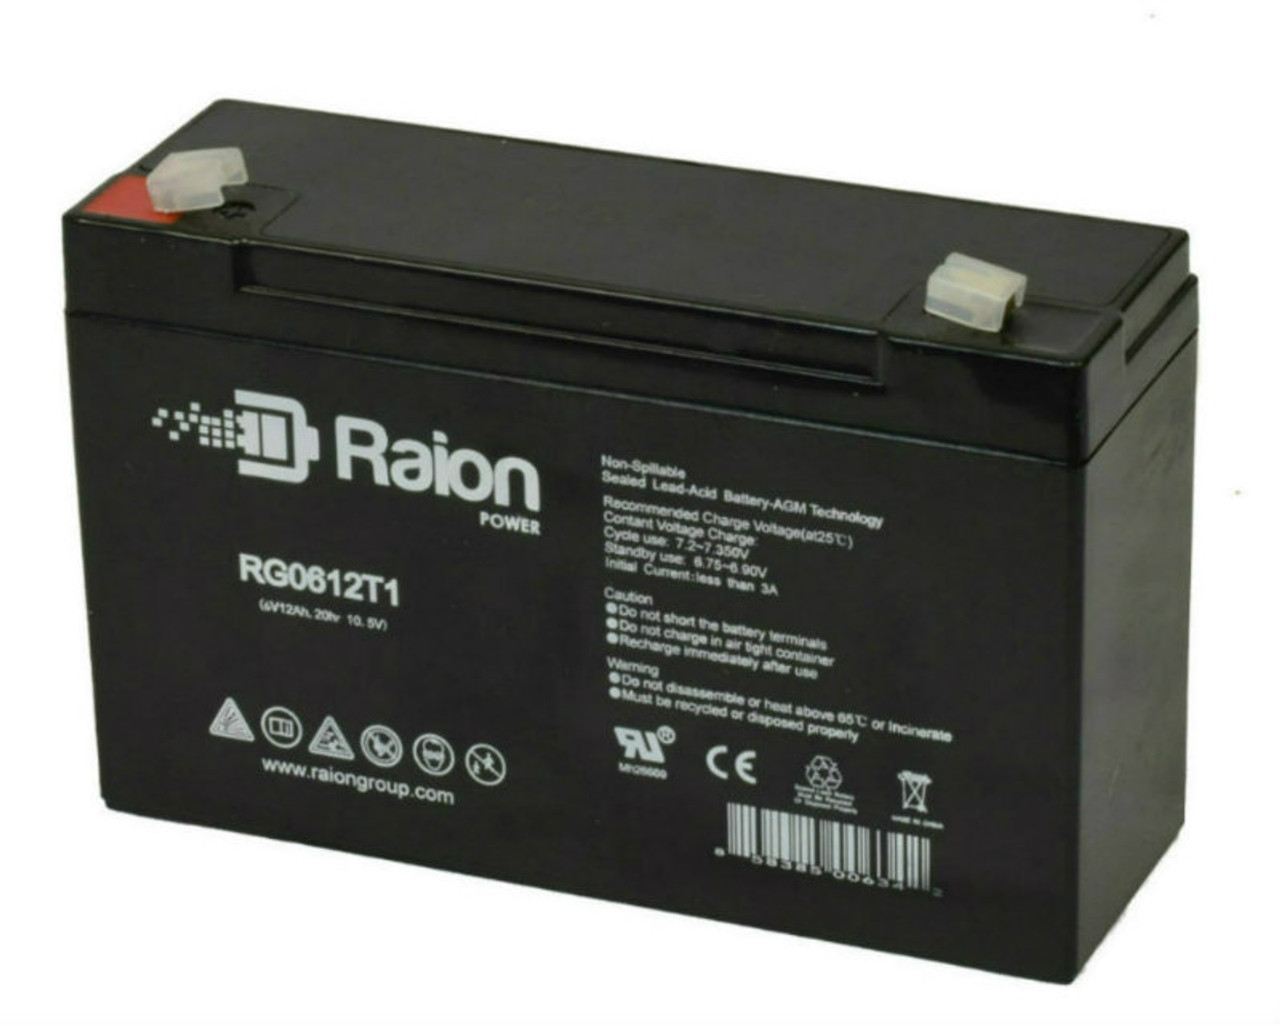 Raion Power RG06120T1 Replacement Battery for Palma PM12A-6